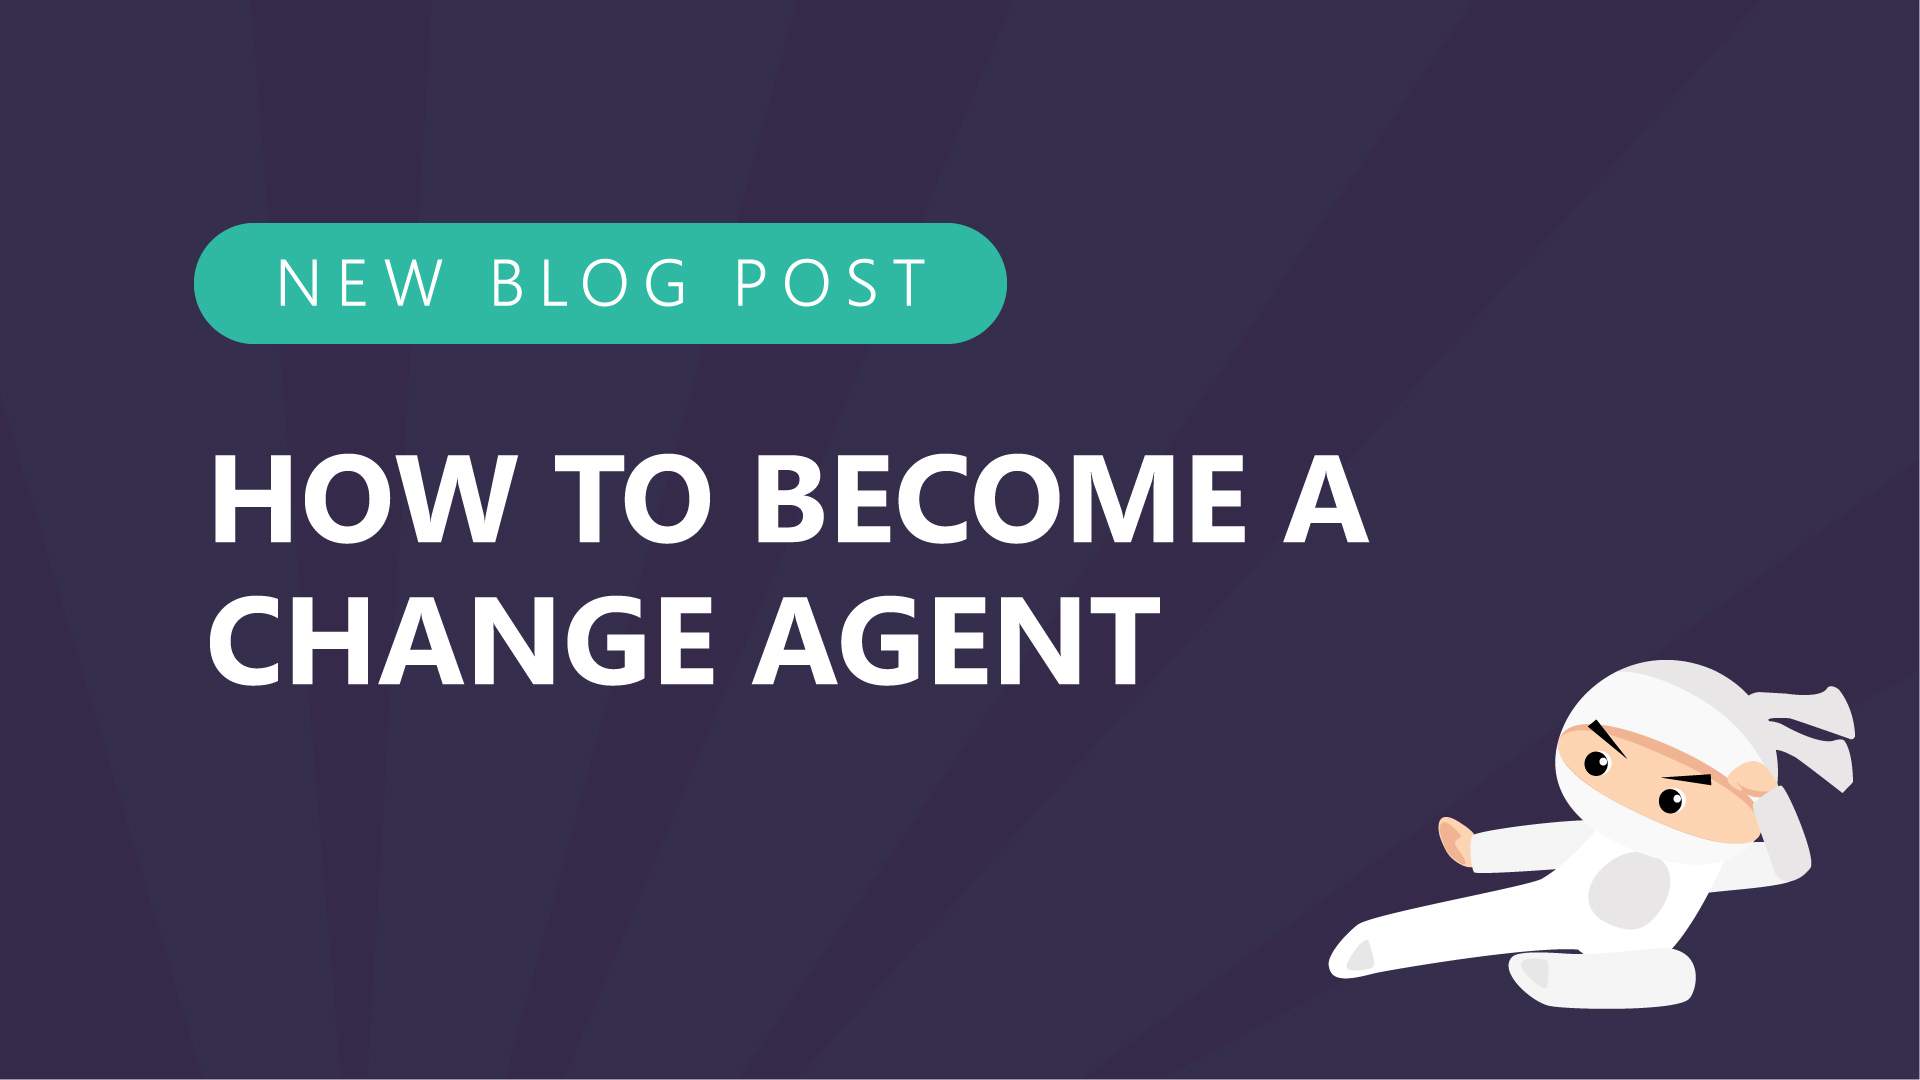 How to Become a Change Agent